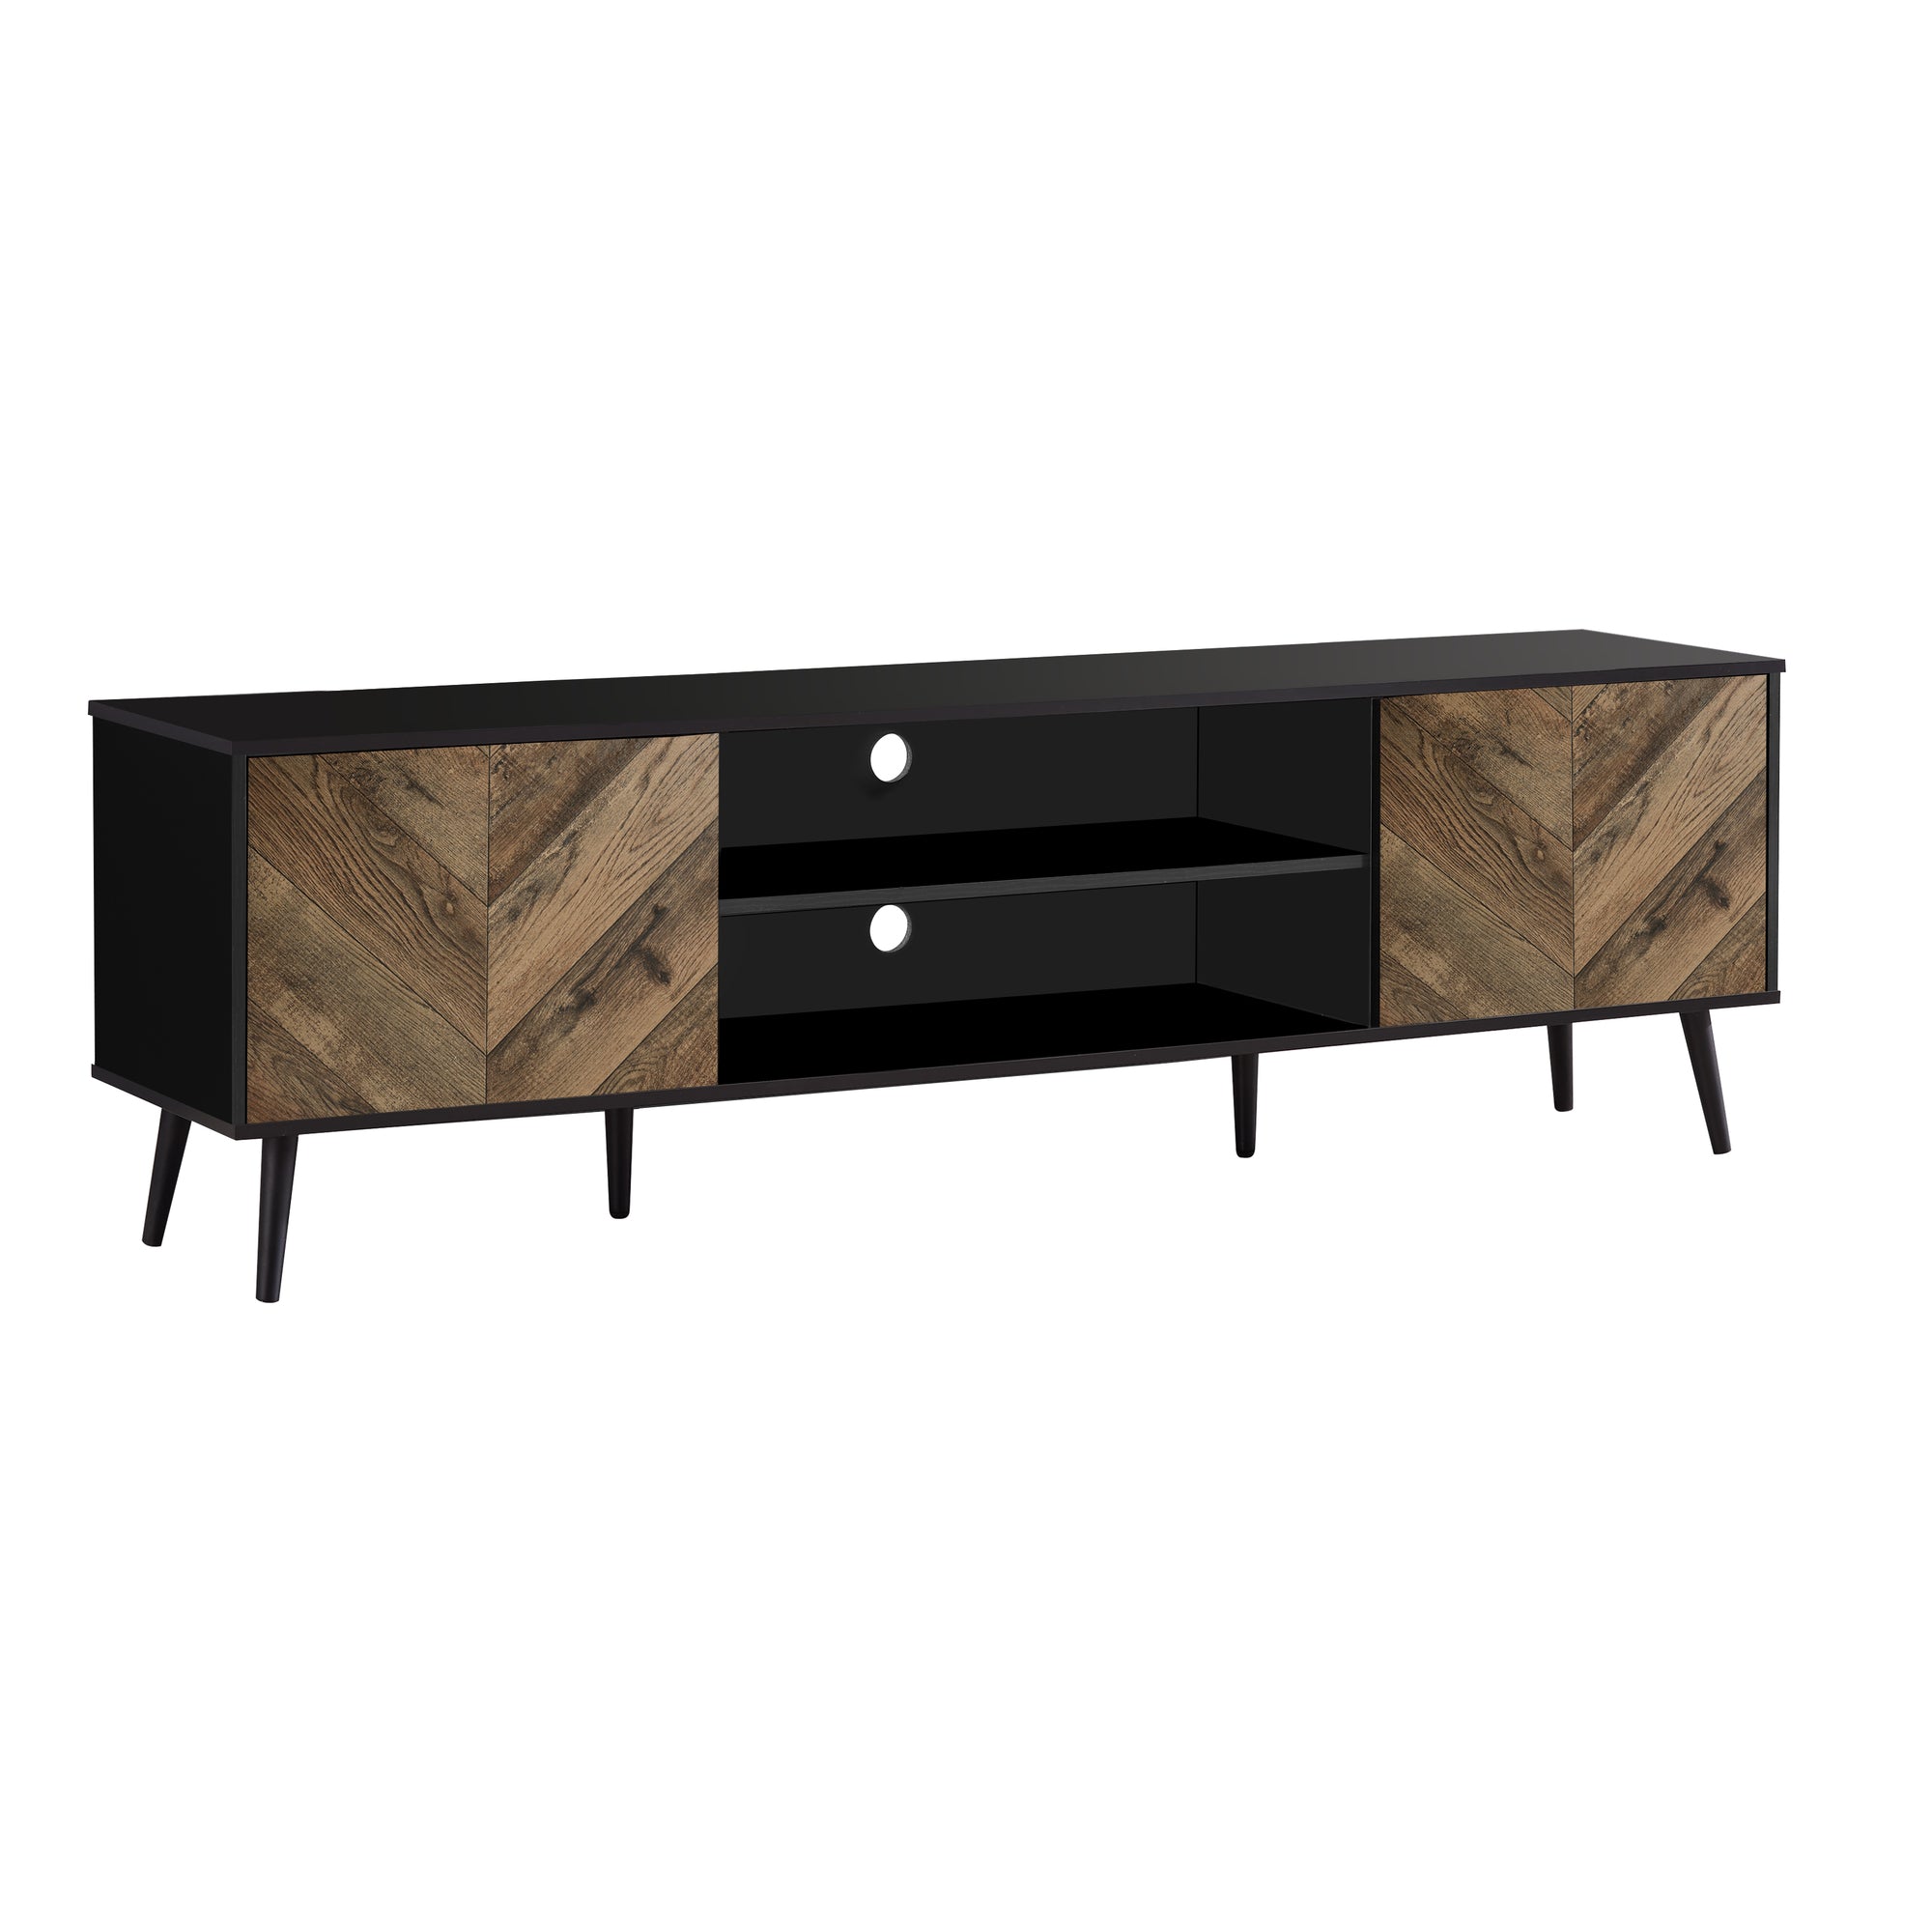 I 2781 - TV STAND - 72"L / BLACK WITH 2 WOOD-LOOK DOORS BY MONARCH SPECIALTIES INC